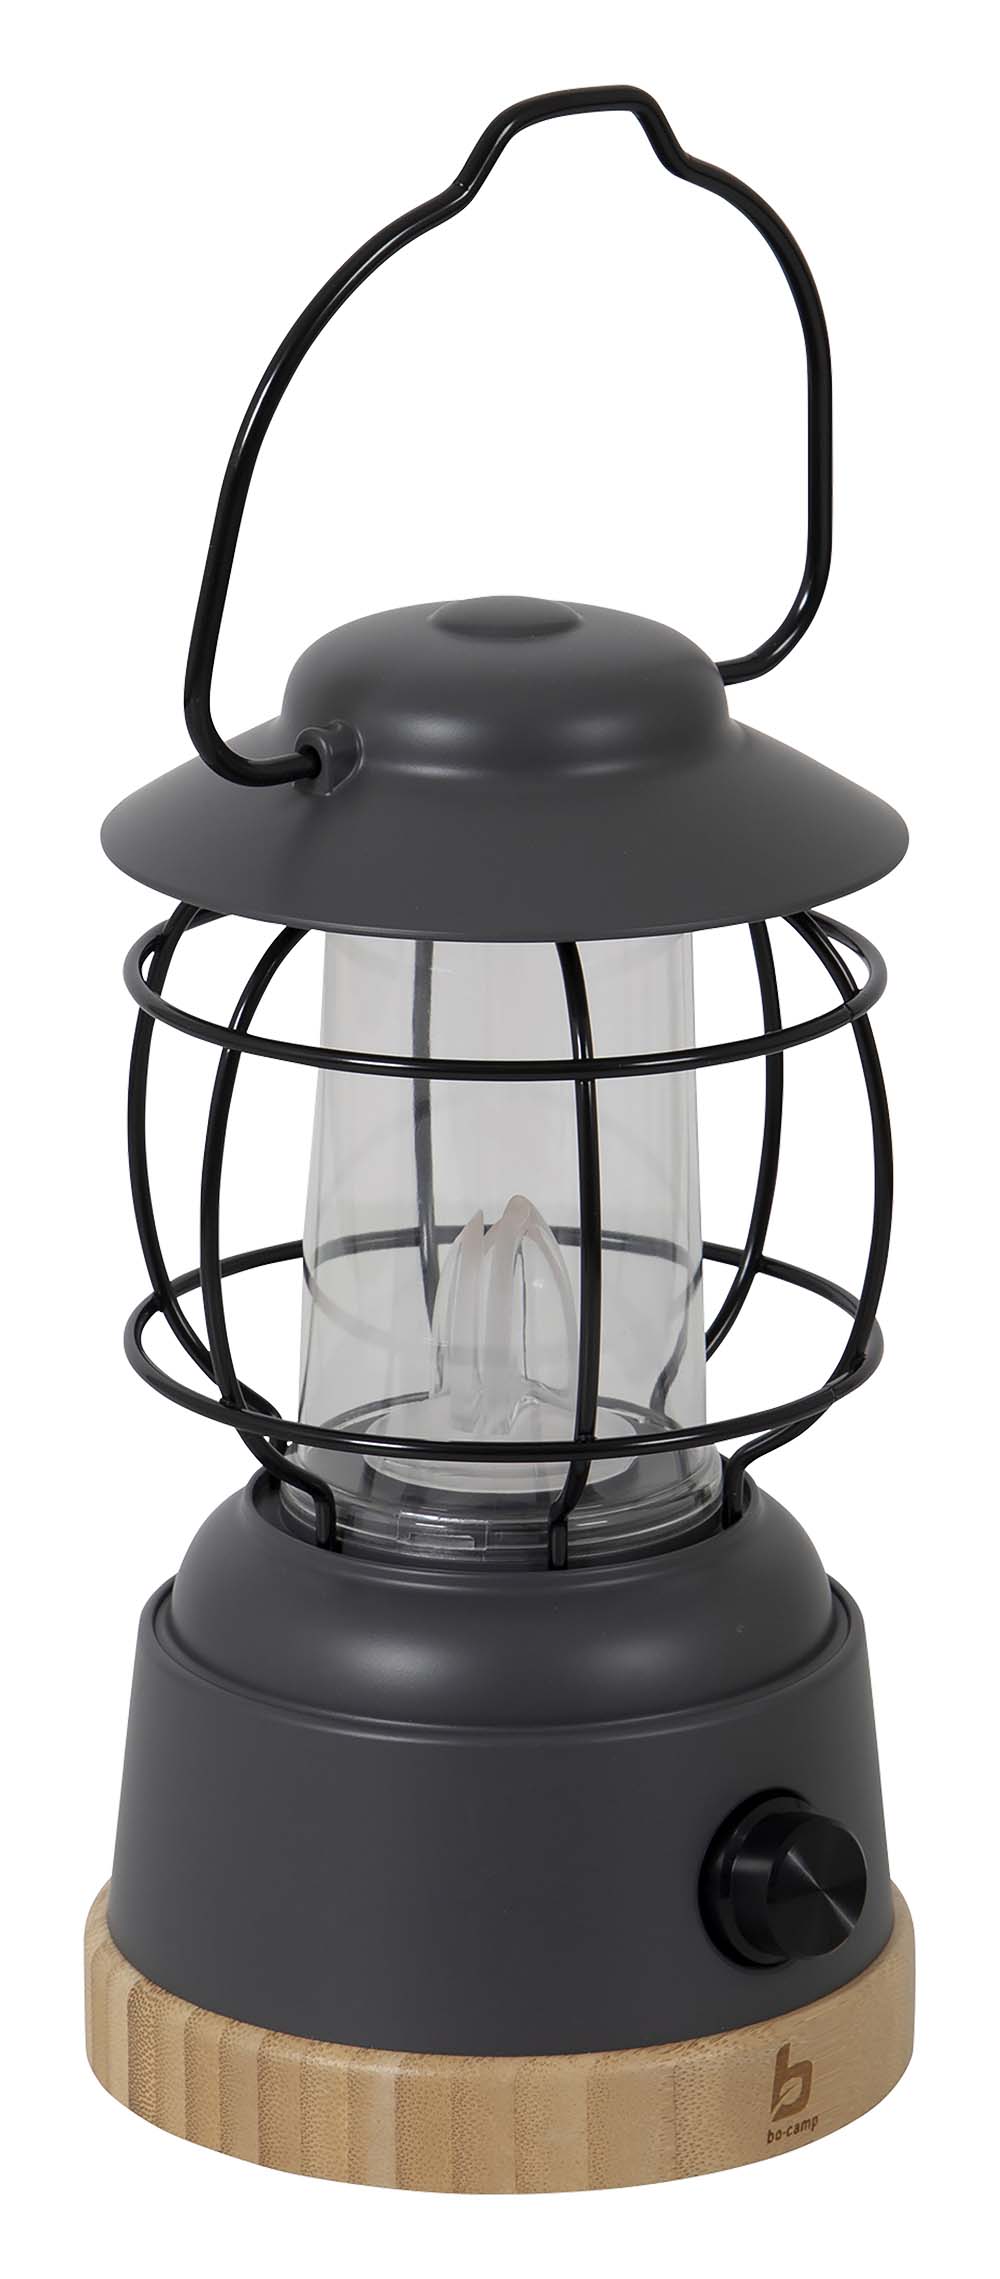 5818924 An attractive rechargeable table lantern with stylish outdoor look. Gives a pleasant light due to the warm white LED lighting with stepless dimming function. Equipped with a bamboo base, plastic housing and a handle. The built-in Li-ion battery can be recharged with an included USB cable. Ideal for on a table, cabinet or for hanging.